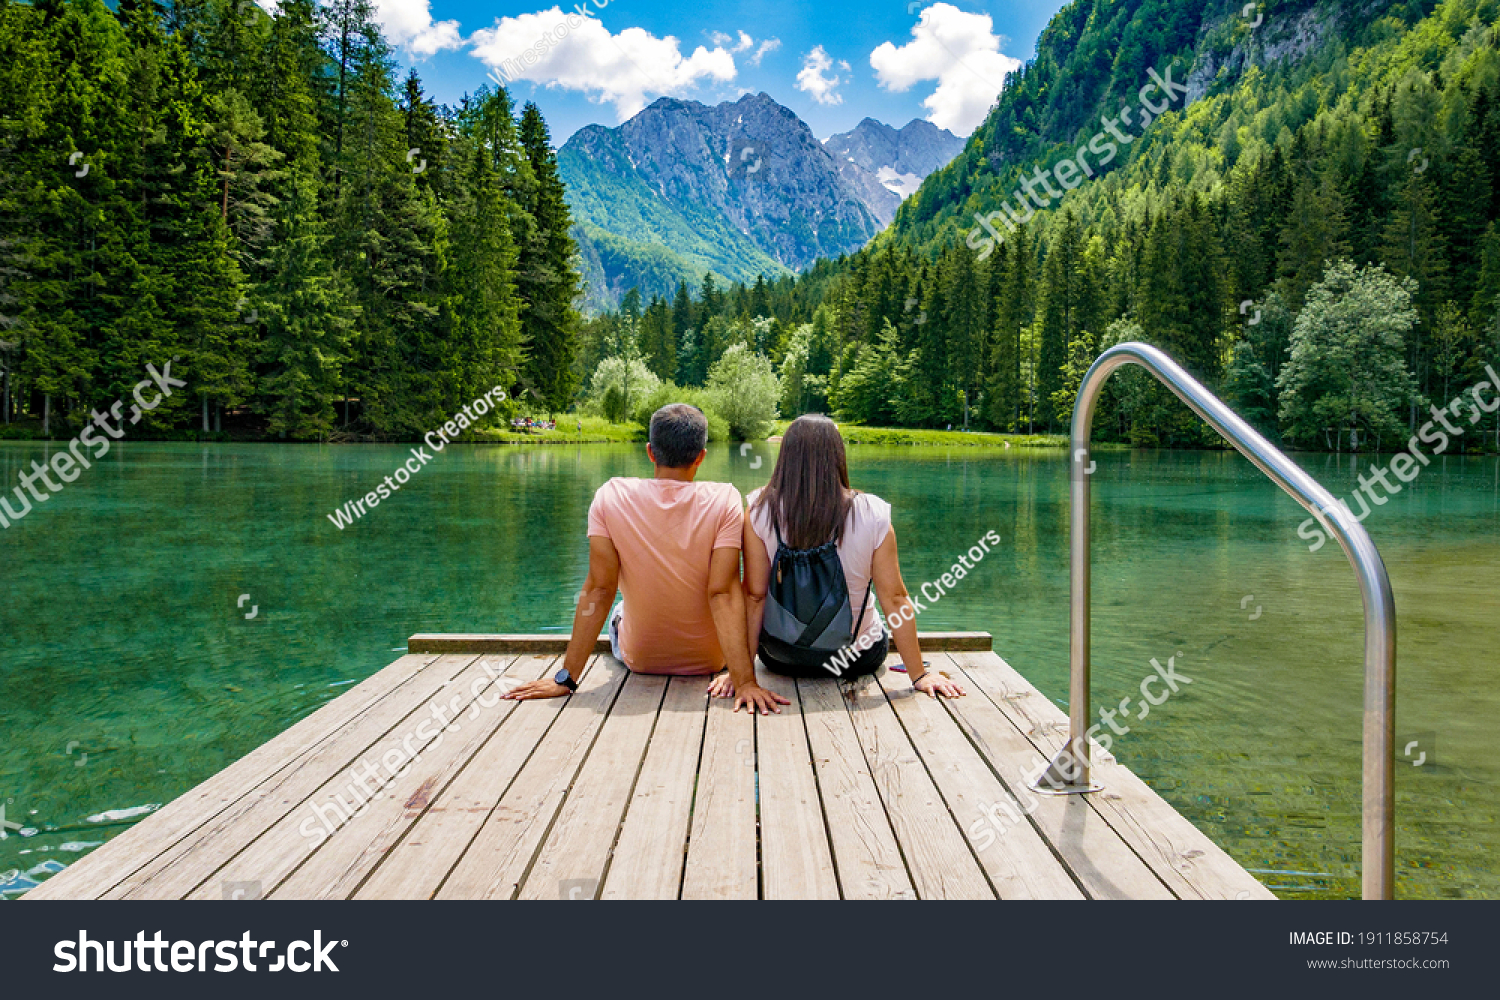 Rear view of young female sitting on wooden deck by beautiful lake in mountains  Green, spring, flower crown, outdoors  Zgornje Jezersko, Slovenia #1911858754